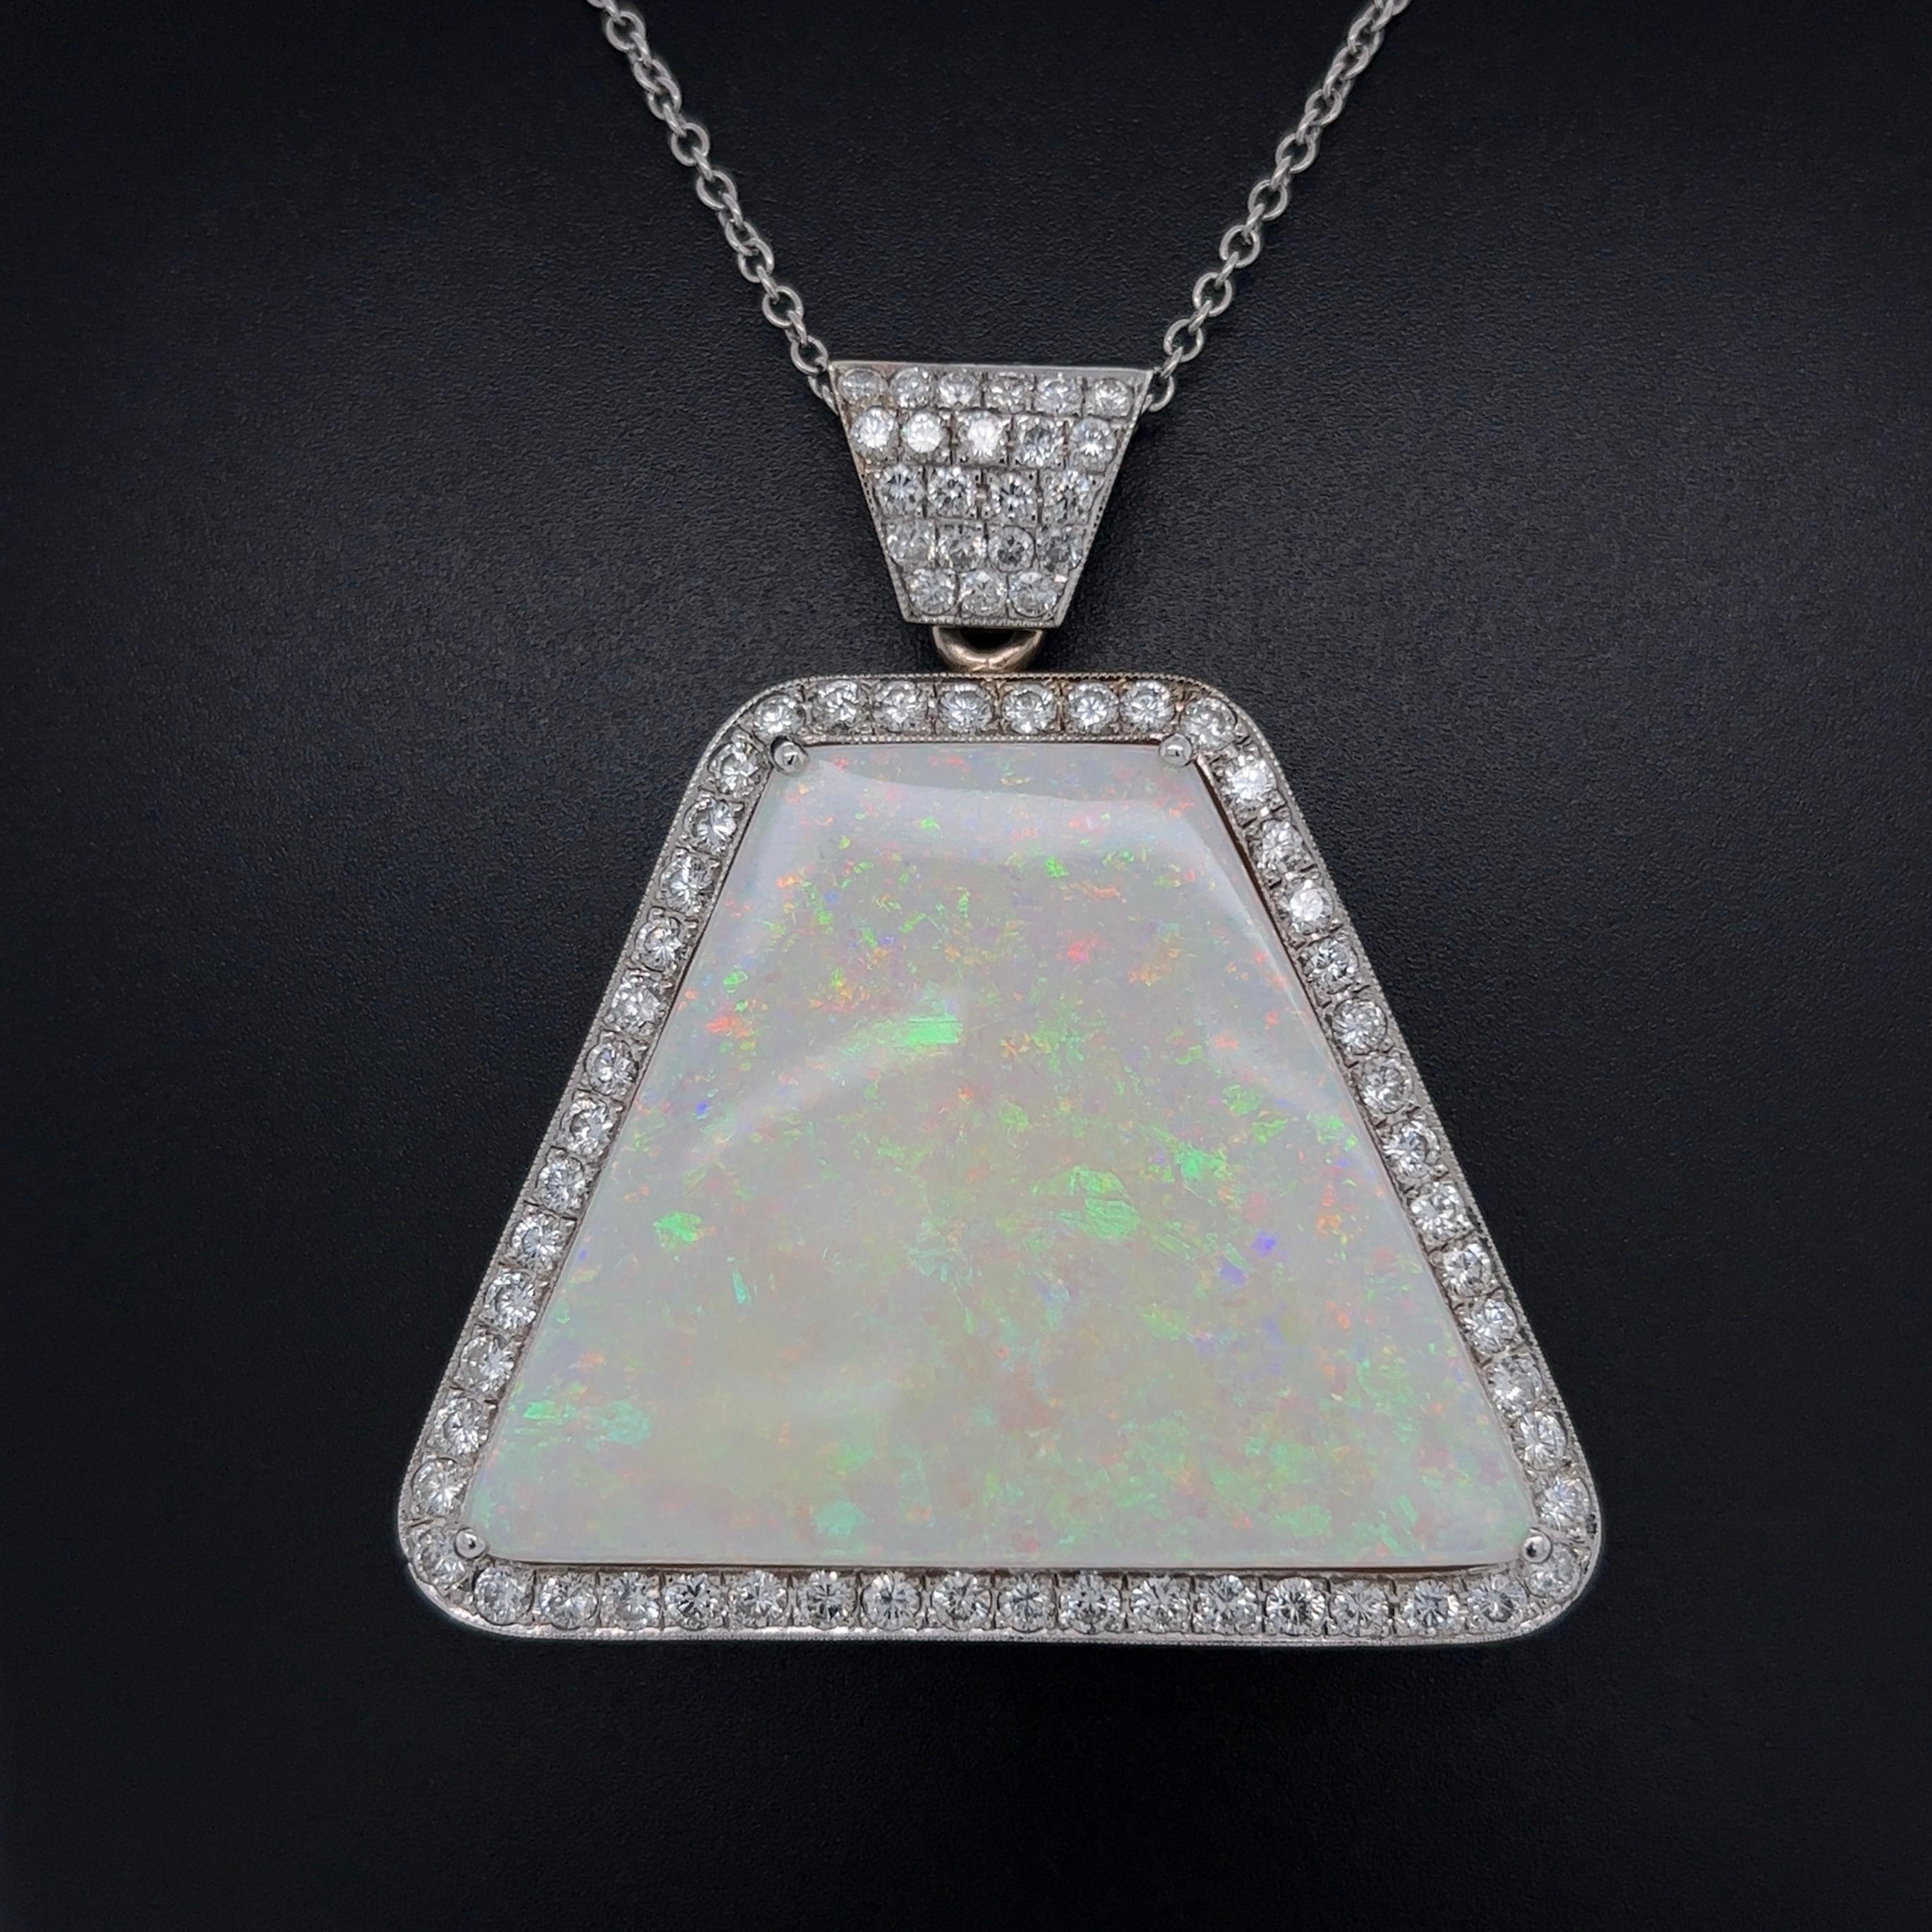 Simply Beautiful! Elegant and finely detailed Gold Pendant Necklace. Hand set with a securely nestled 79.63 Carat Trapezoid Australian White Opal and surrounded by Brilliant-cut Diamonds, weighing approx. 4.04tcw. Pendant size: 2.27” l x 1.06” w.